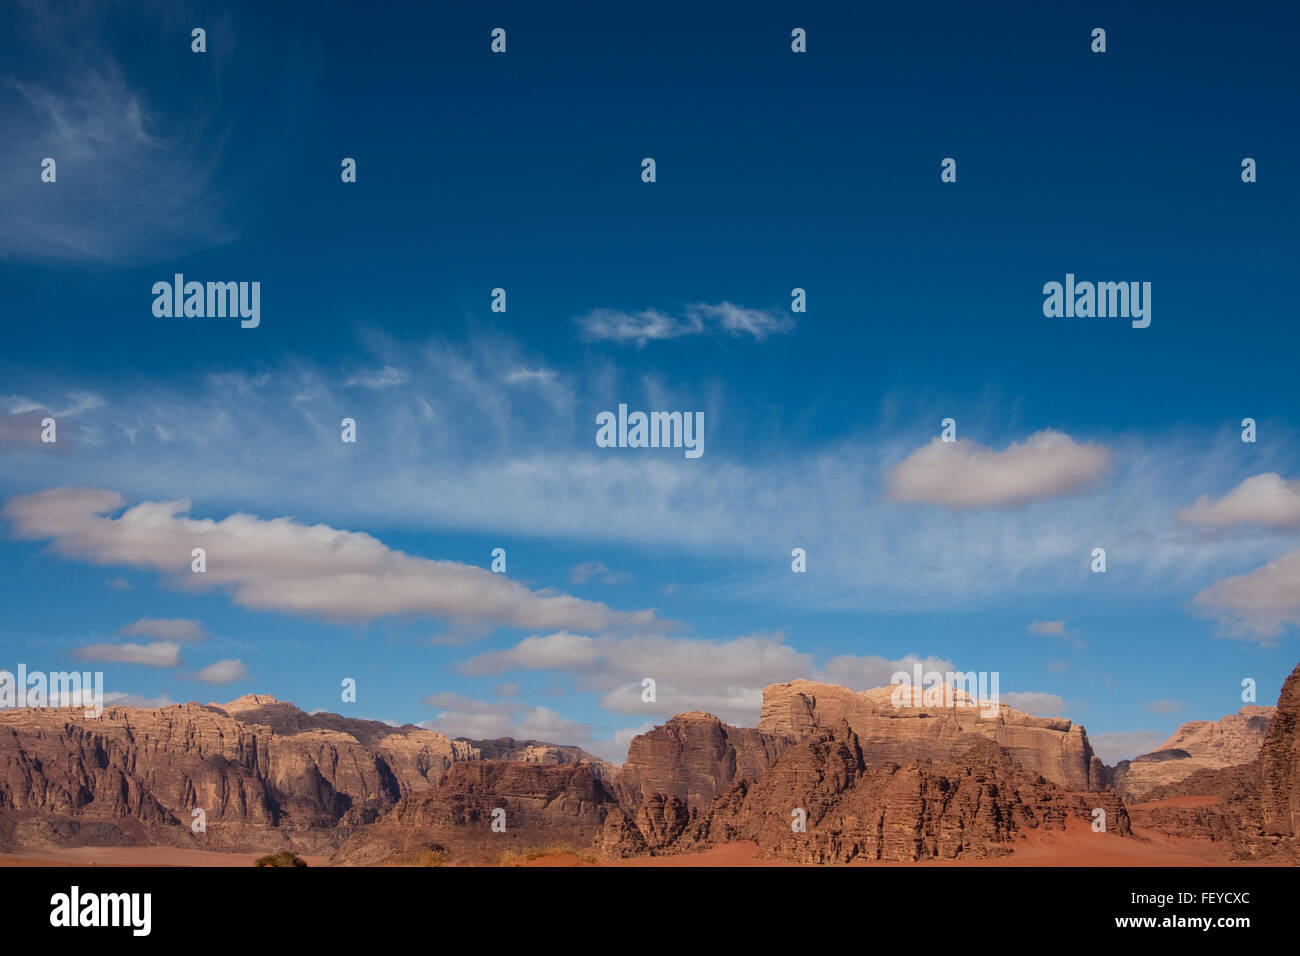 Mountains and sky with sparse clouds in Wadi Rum desert reservation, Jordan. Stock Photo